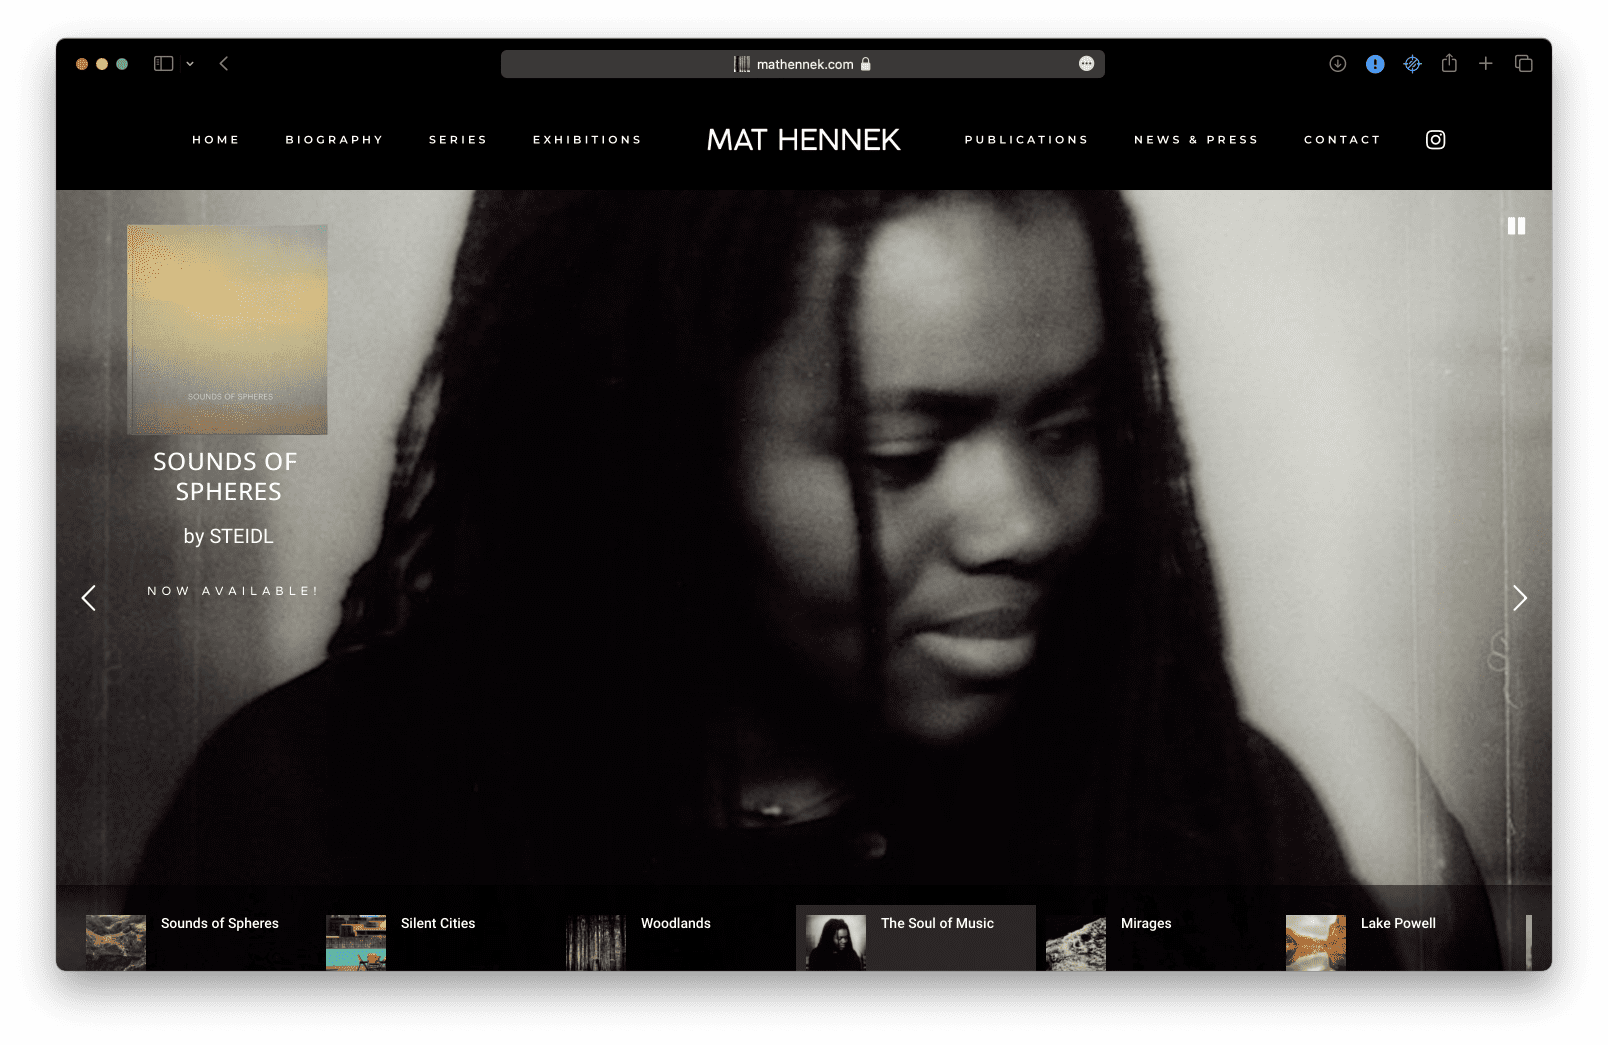 A photograph of Tracy Chapman